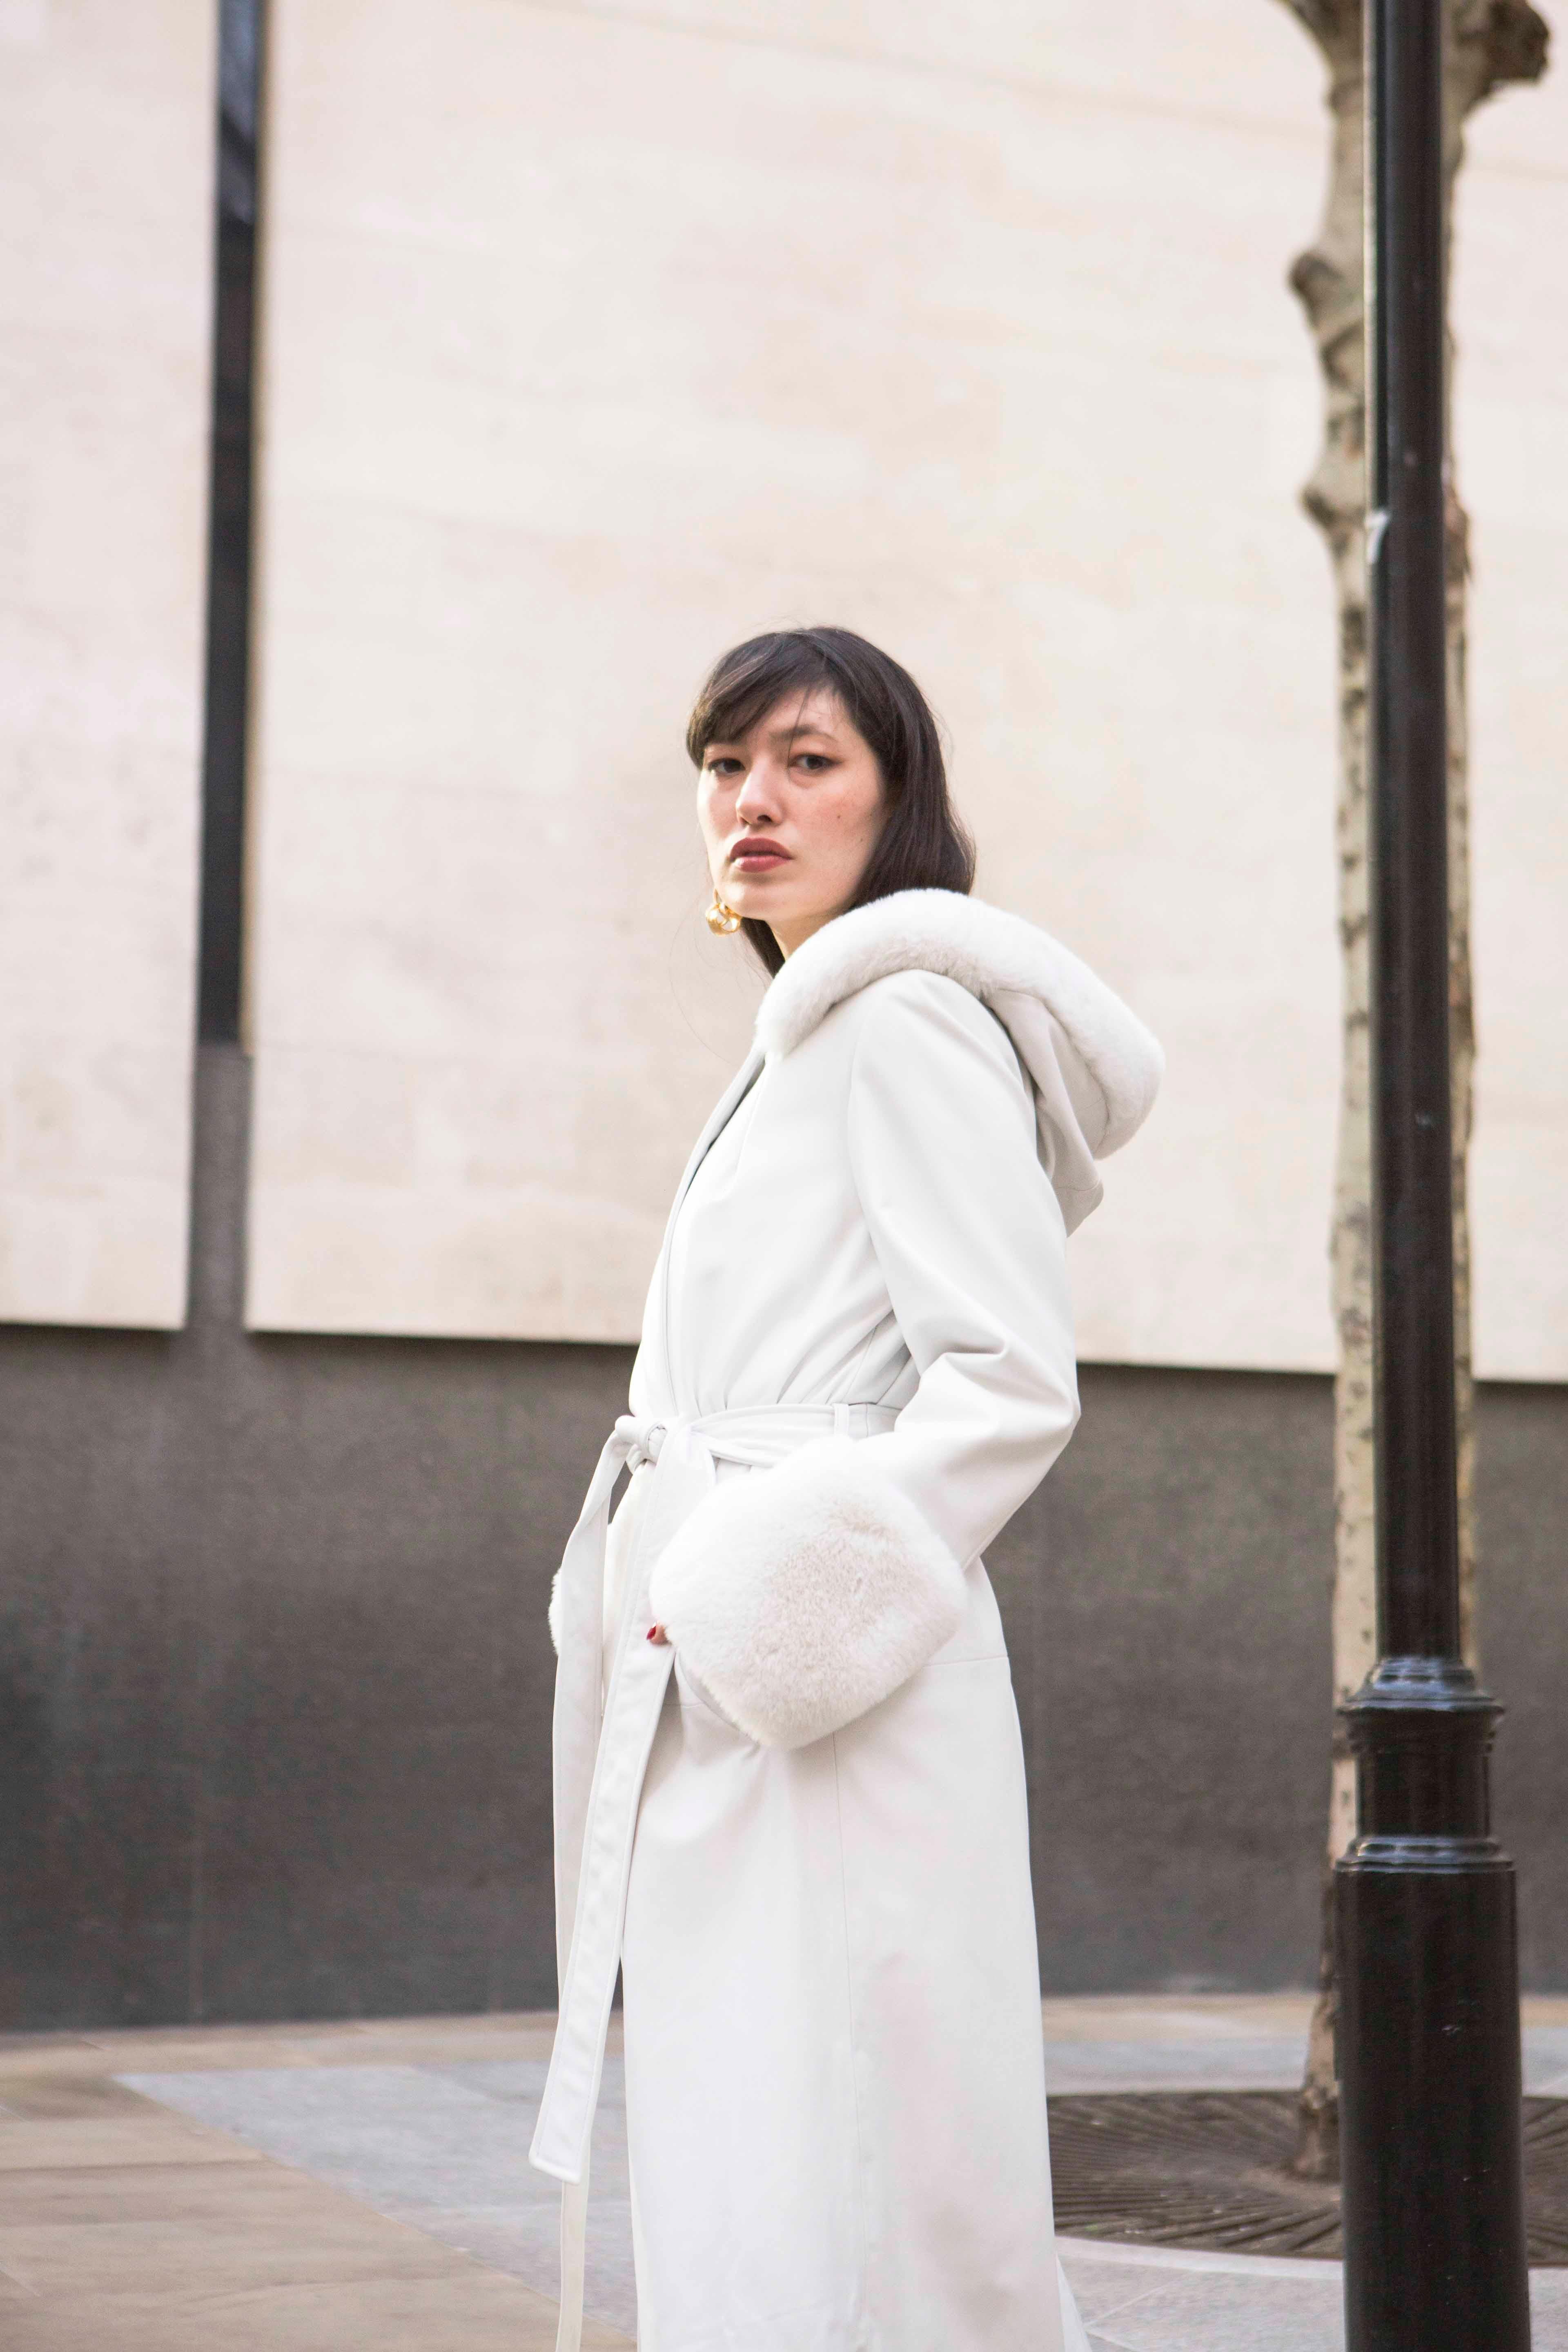 Verheyen London Hooded Leather Trench Coat in White with Faux Fur - Size uk 14

Handmade in London, made with 100% Italian Lambs Leather and the highest quality of faux fur to match, this luxury item is an investment piece to wear for a lifetime. 